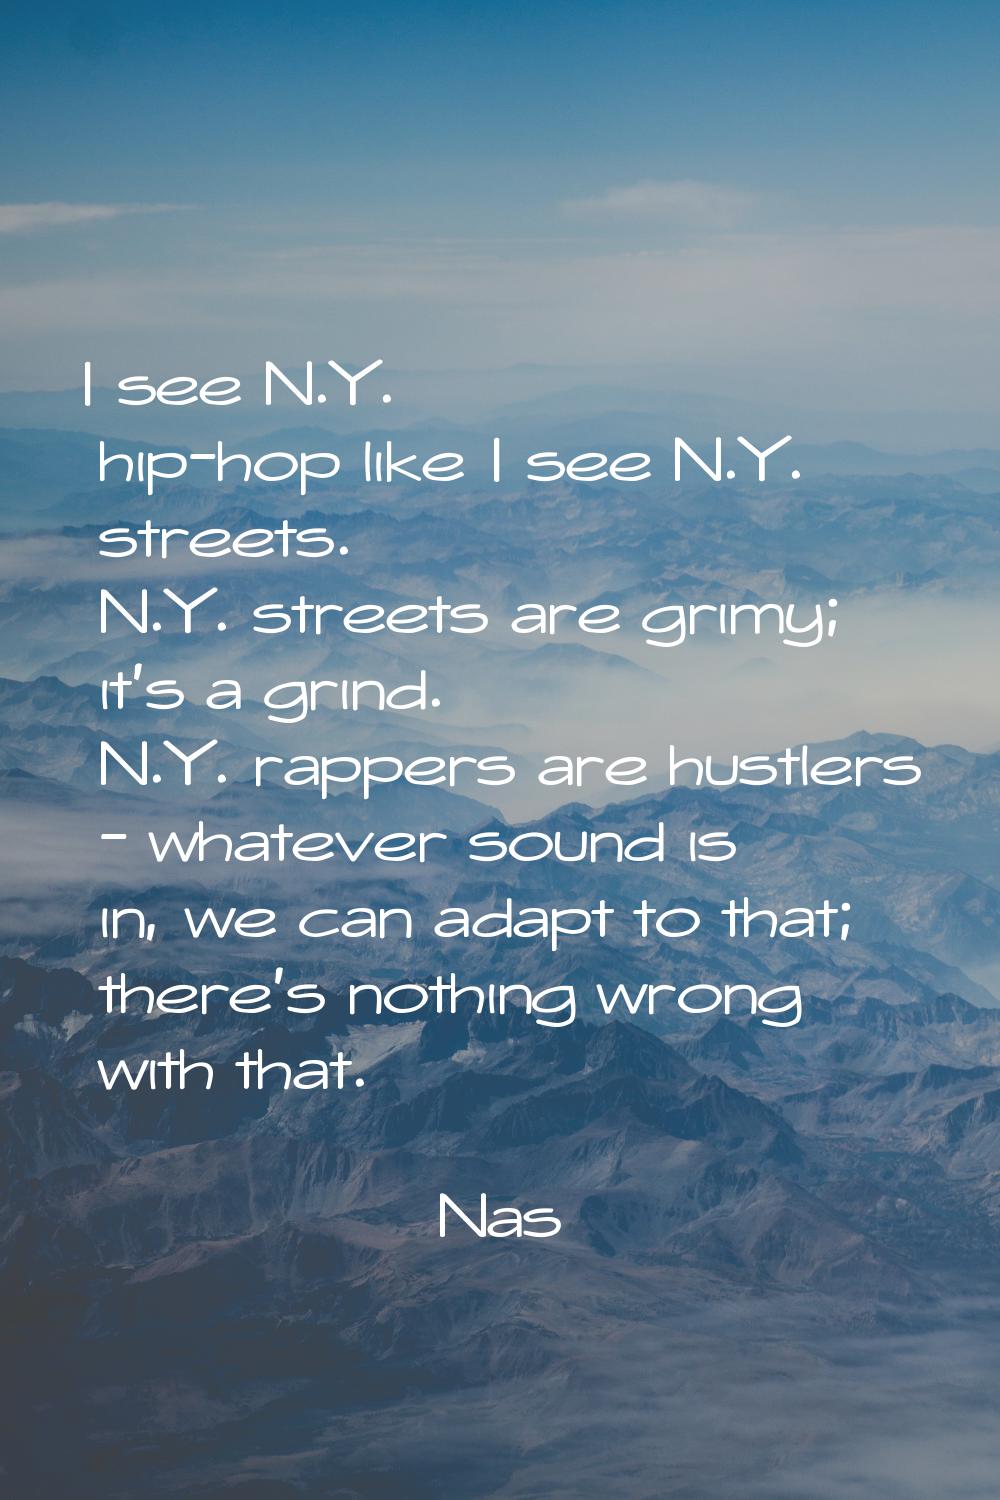 I see N.Y. hip-hop like I see N.Y. streets. N.Y. streets are grimy; it's a grind. N.Y. rappers are 